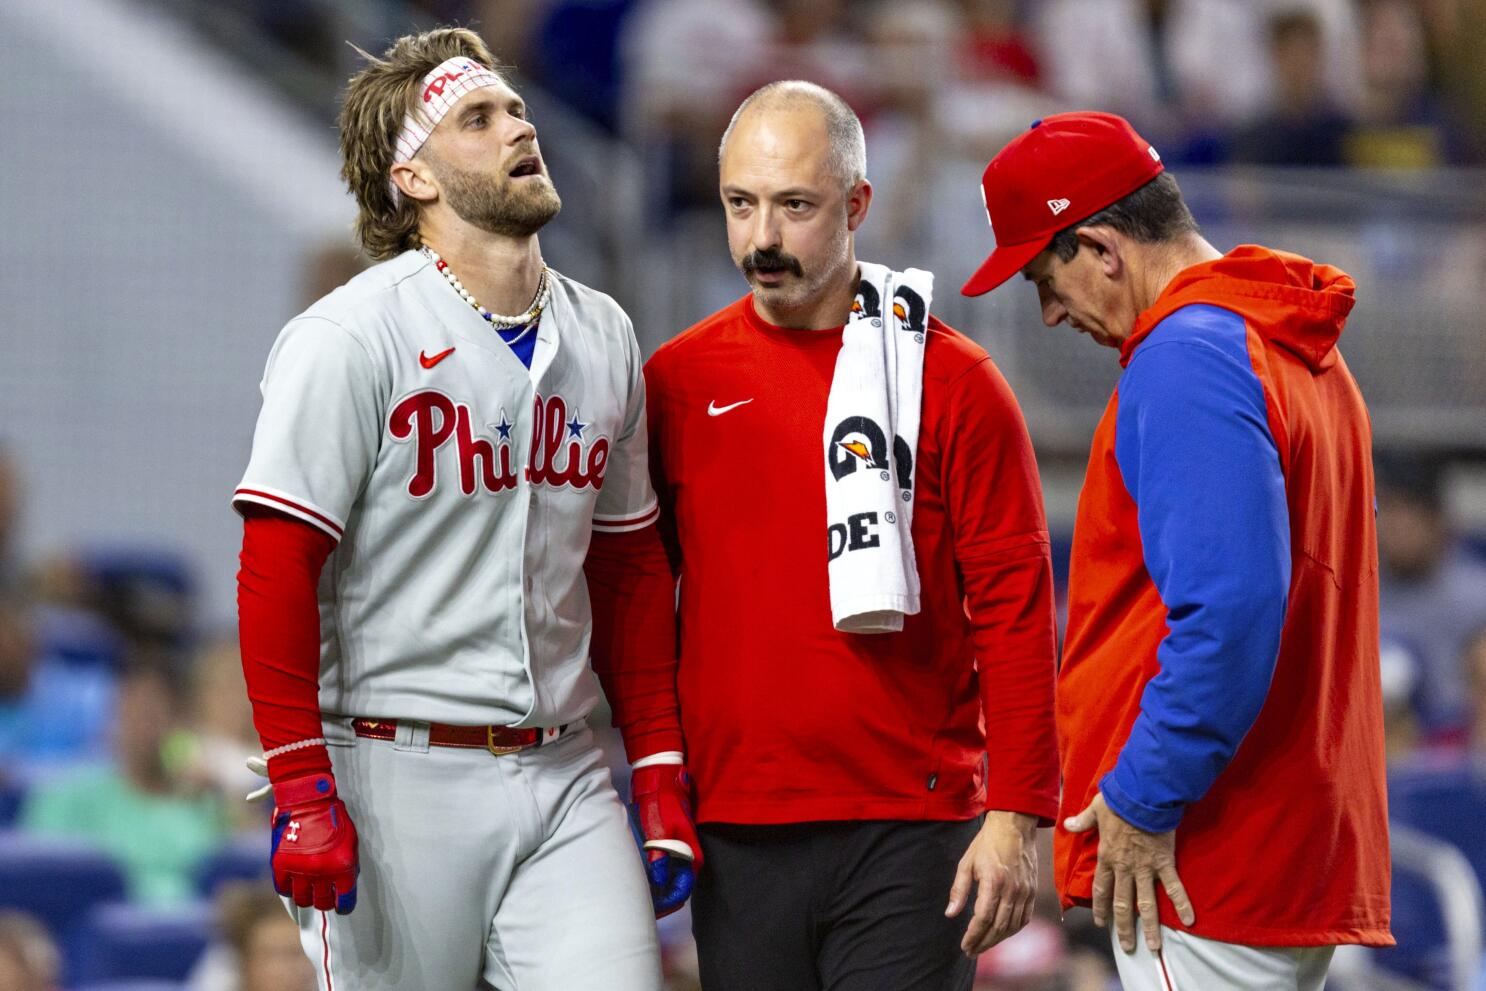 Philadelphia Phillies on X: You are so welcome for this excellent